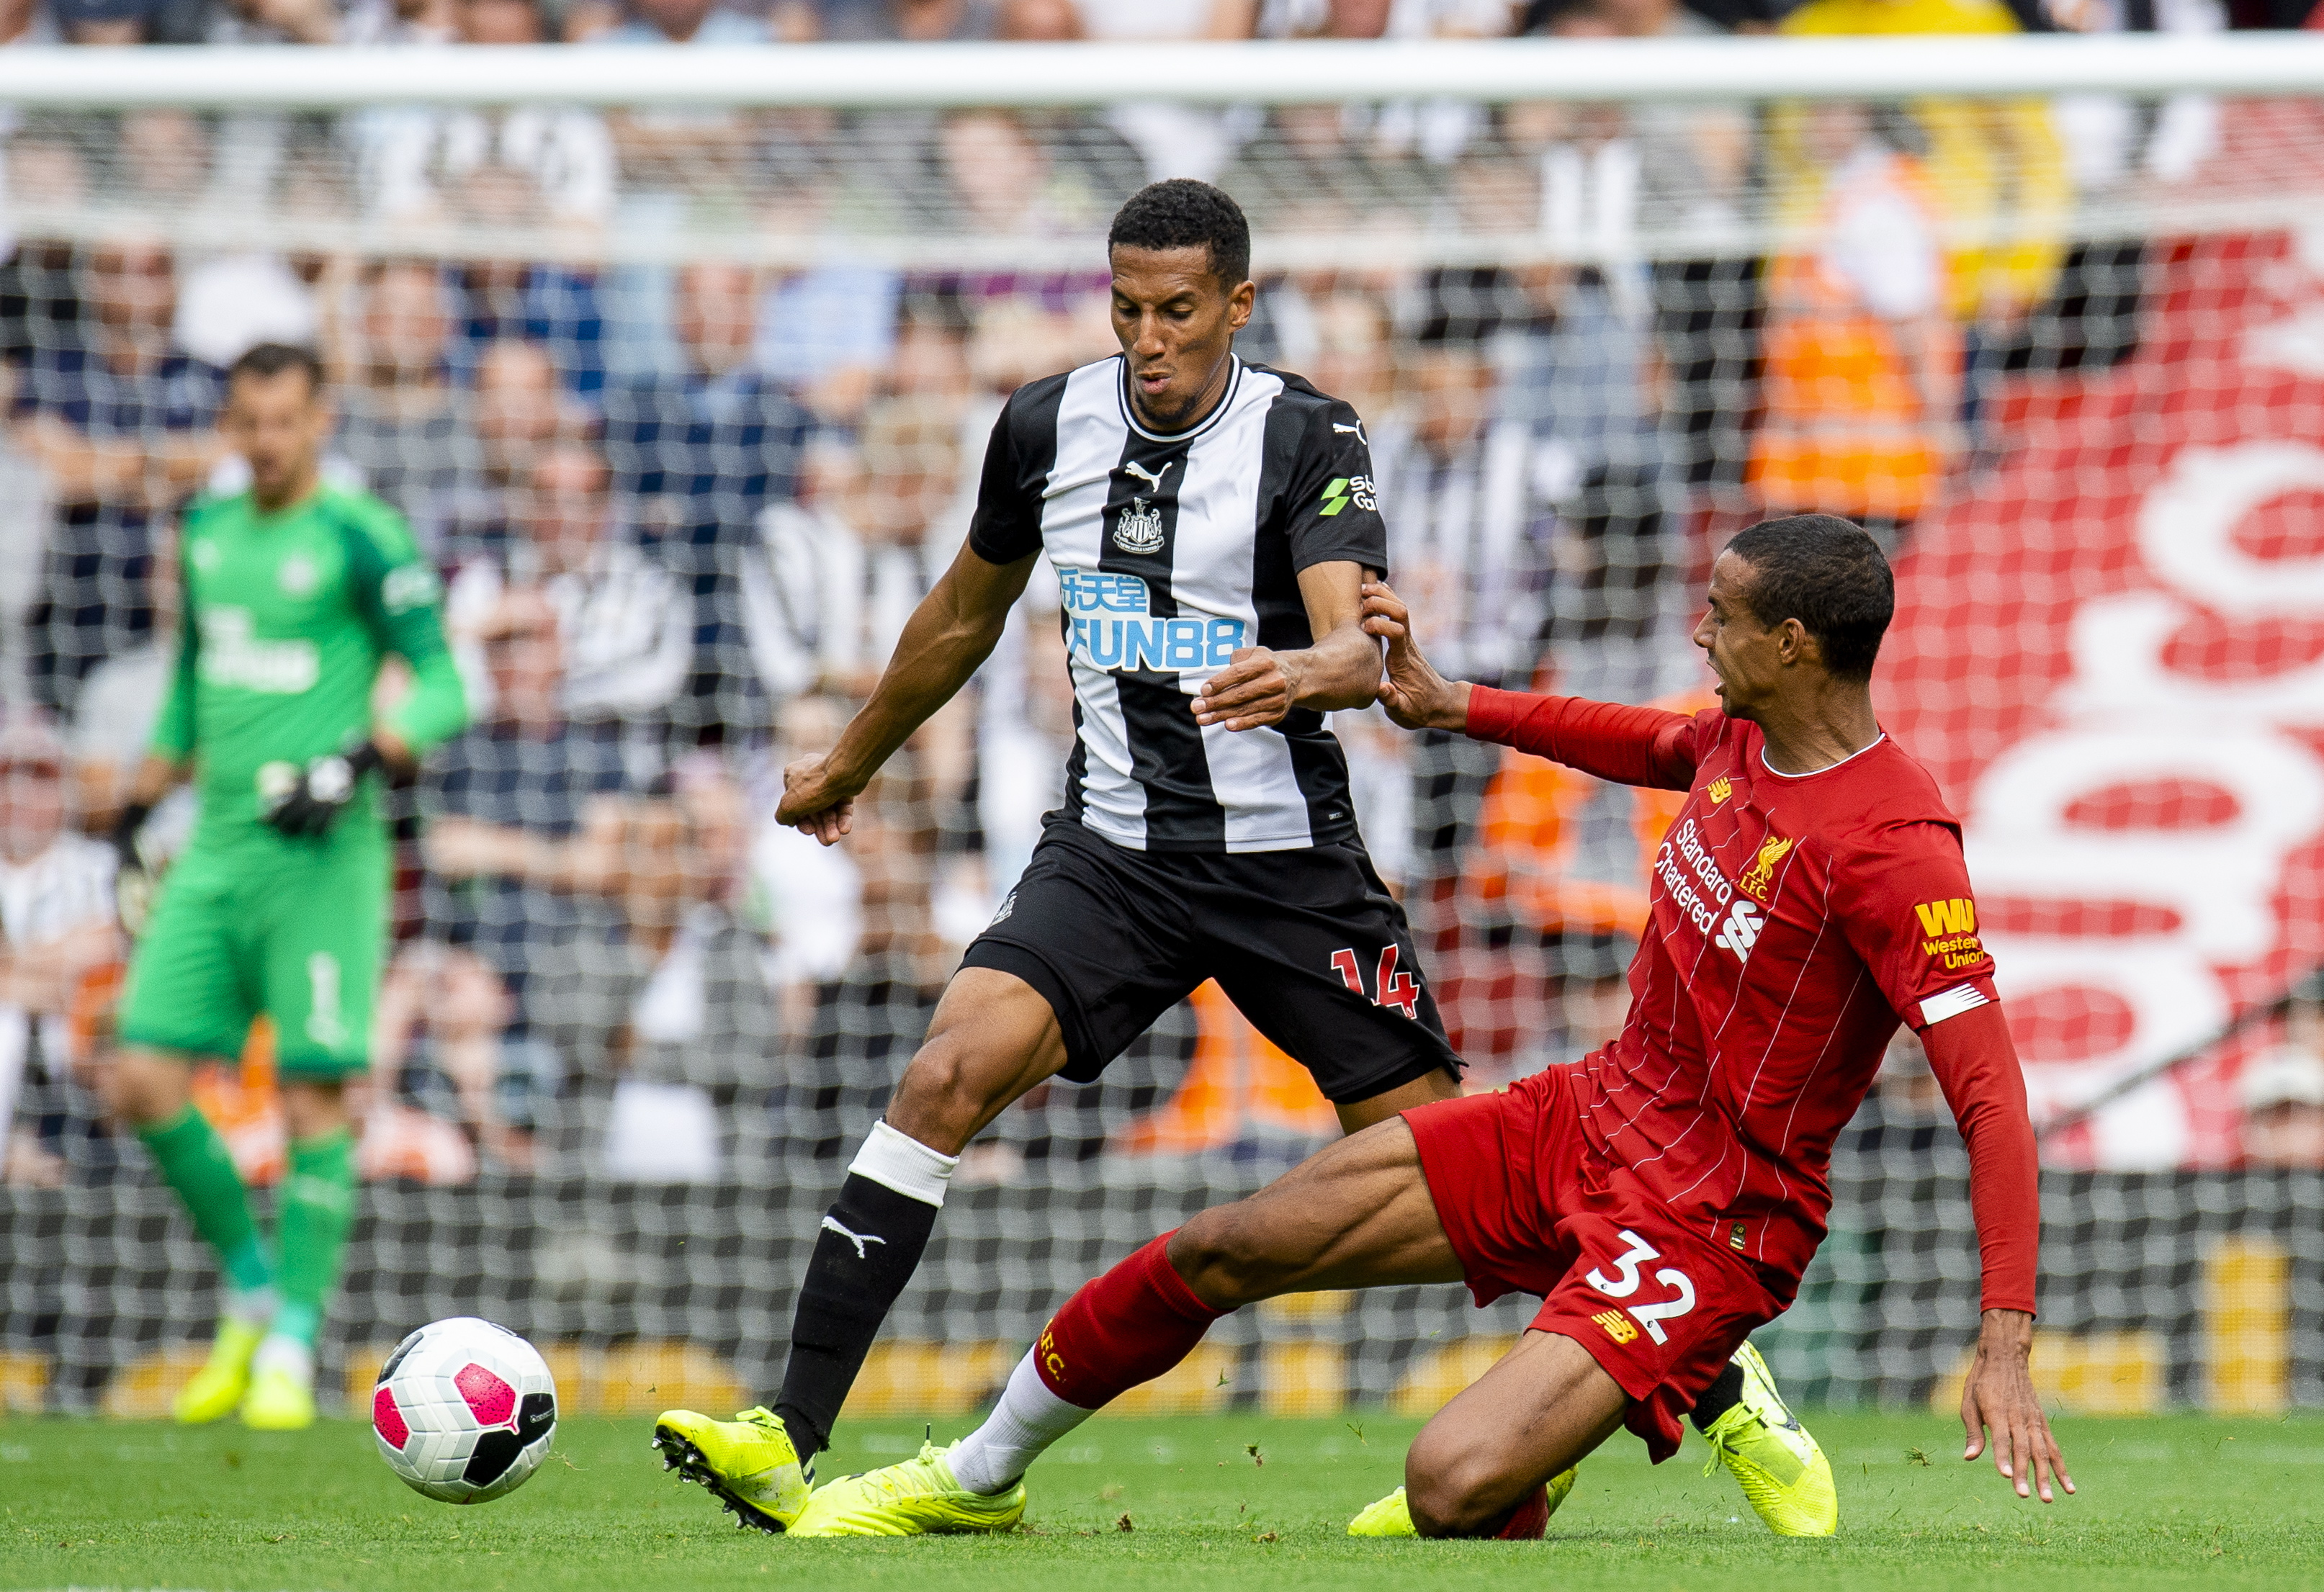 epa07841783 Newcastle's Isaac Hayden (L) in action with Liverpool's Joel Matip (R) during the English Premier League soccer match between Liverpool and Newcastle United held at the Anfield in Liverpool, Britain, 14 September 2019.  EPA/PETER POWELL EDITORIAL USE ONLY. No use with unauthorized audio, video, data, fixture lists, club/league logos or 'live' services. Online in-match use limited to 120 images, no video emulation. No use in betting, games or single club/league/player publications